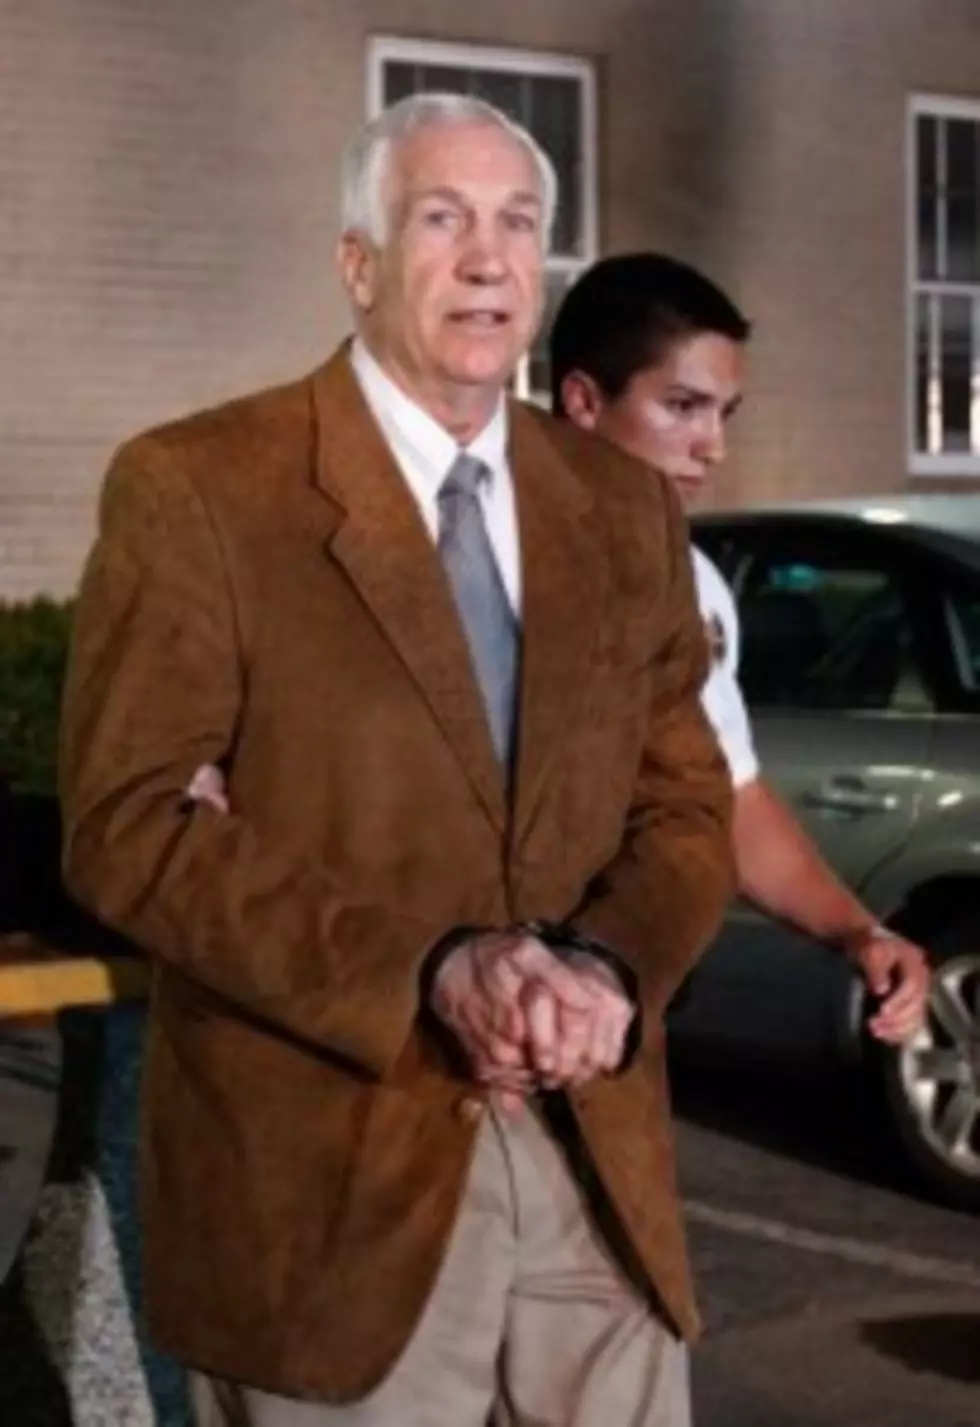 Jerry Sandusky Found Guilty on 45 of 48 Counts